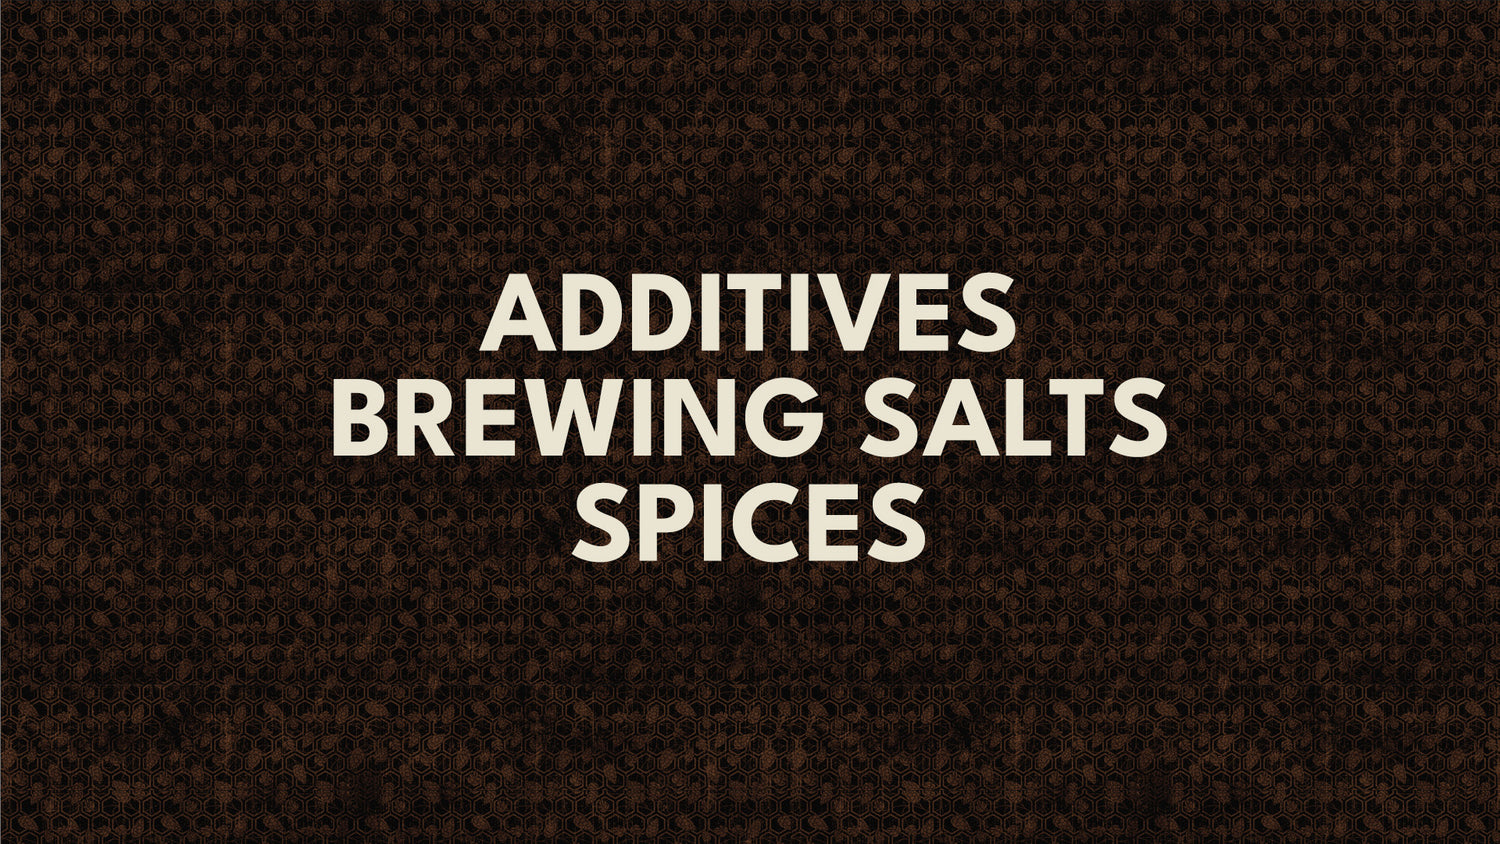 Additives, Brewing Salts, Spices